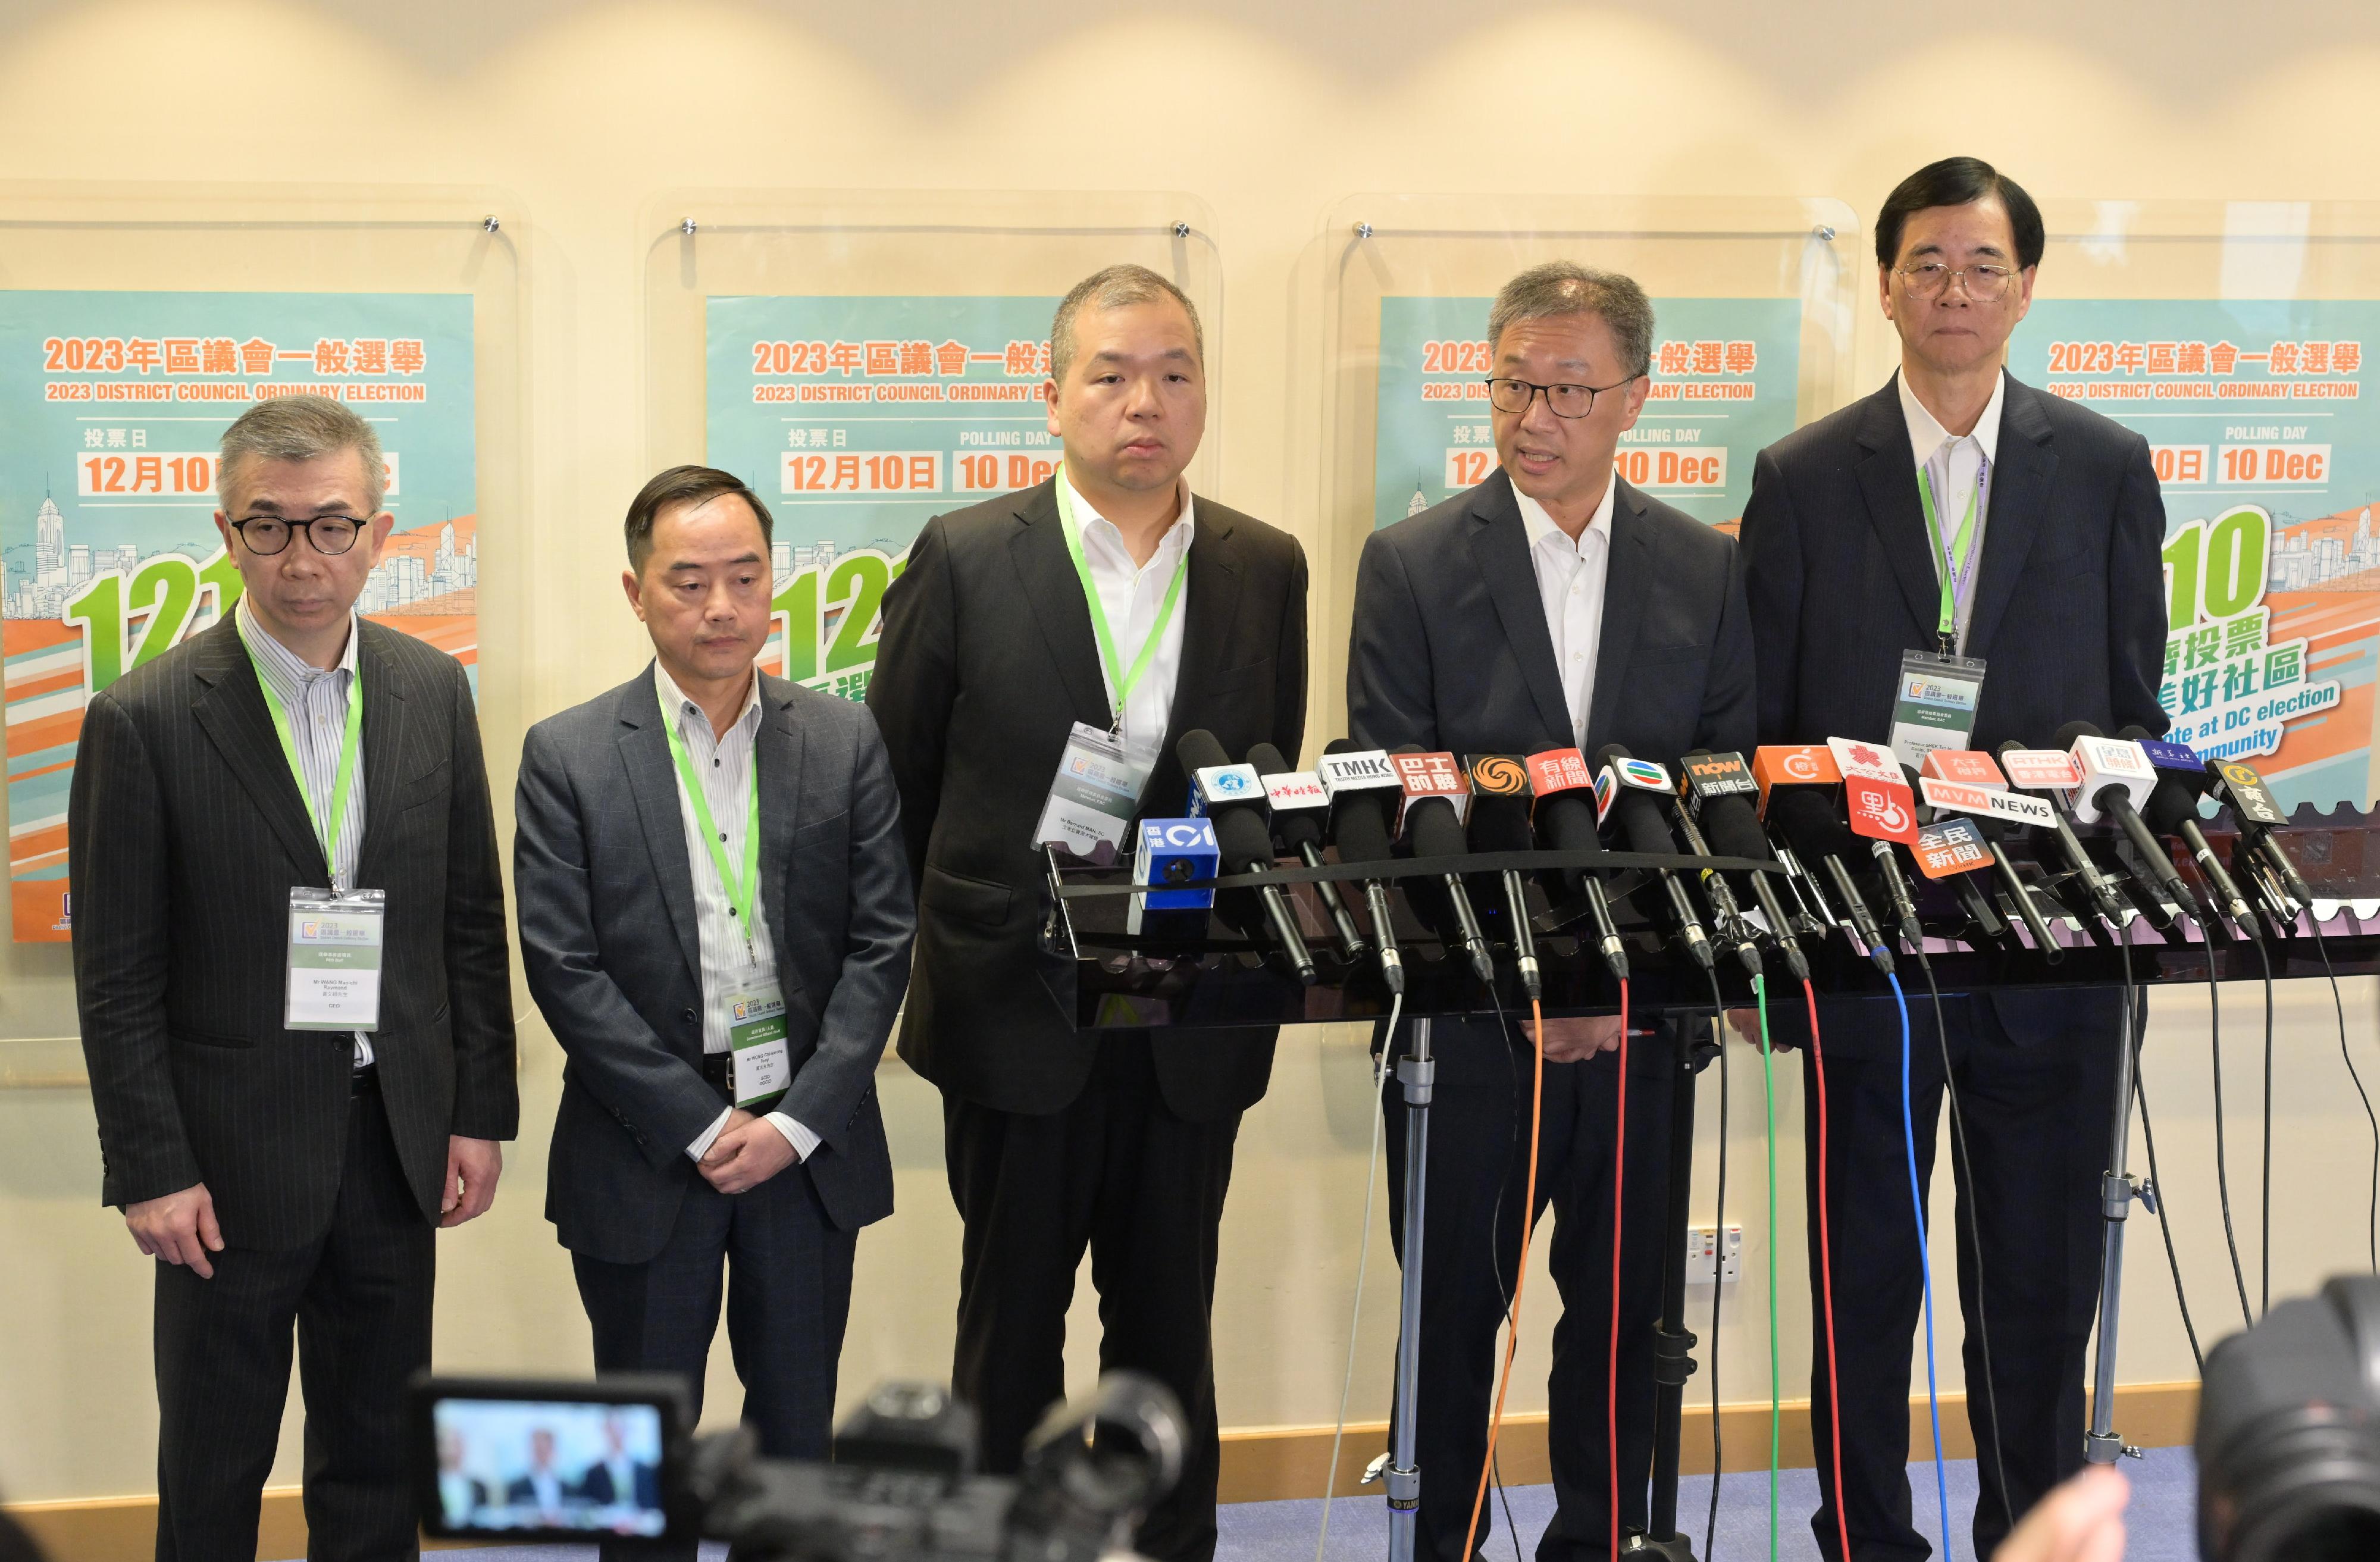 The Chairman of the Electoral Affairs Commission (EAC), Mr Justice David Lok (fourth left); EAC members Professor Daniel Shek (fifth left) and Mr Bernard Man, SC (third left), meet the media to conclude the 2023 District Council Ordinary Election this morning (December 11). Also present are the Government Chief Information Officer, Mr Tony Wong (second left), and the Chief Electoral Officer of the Registration and Electoral Office, Mr Raymond Wang (first left).